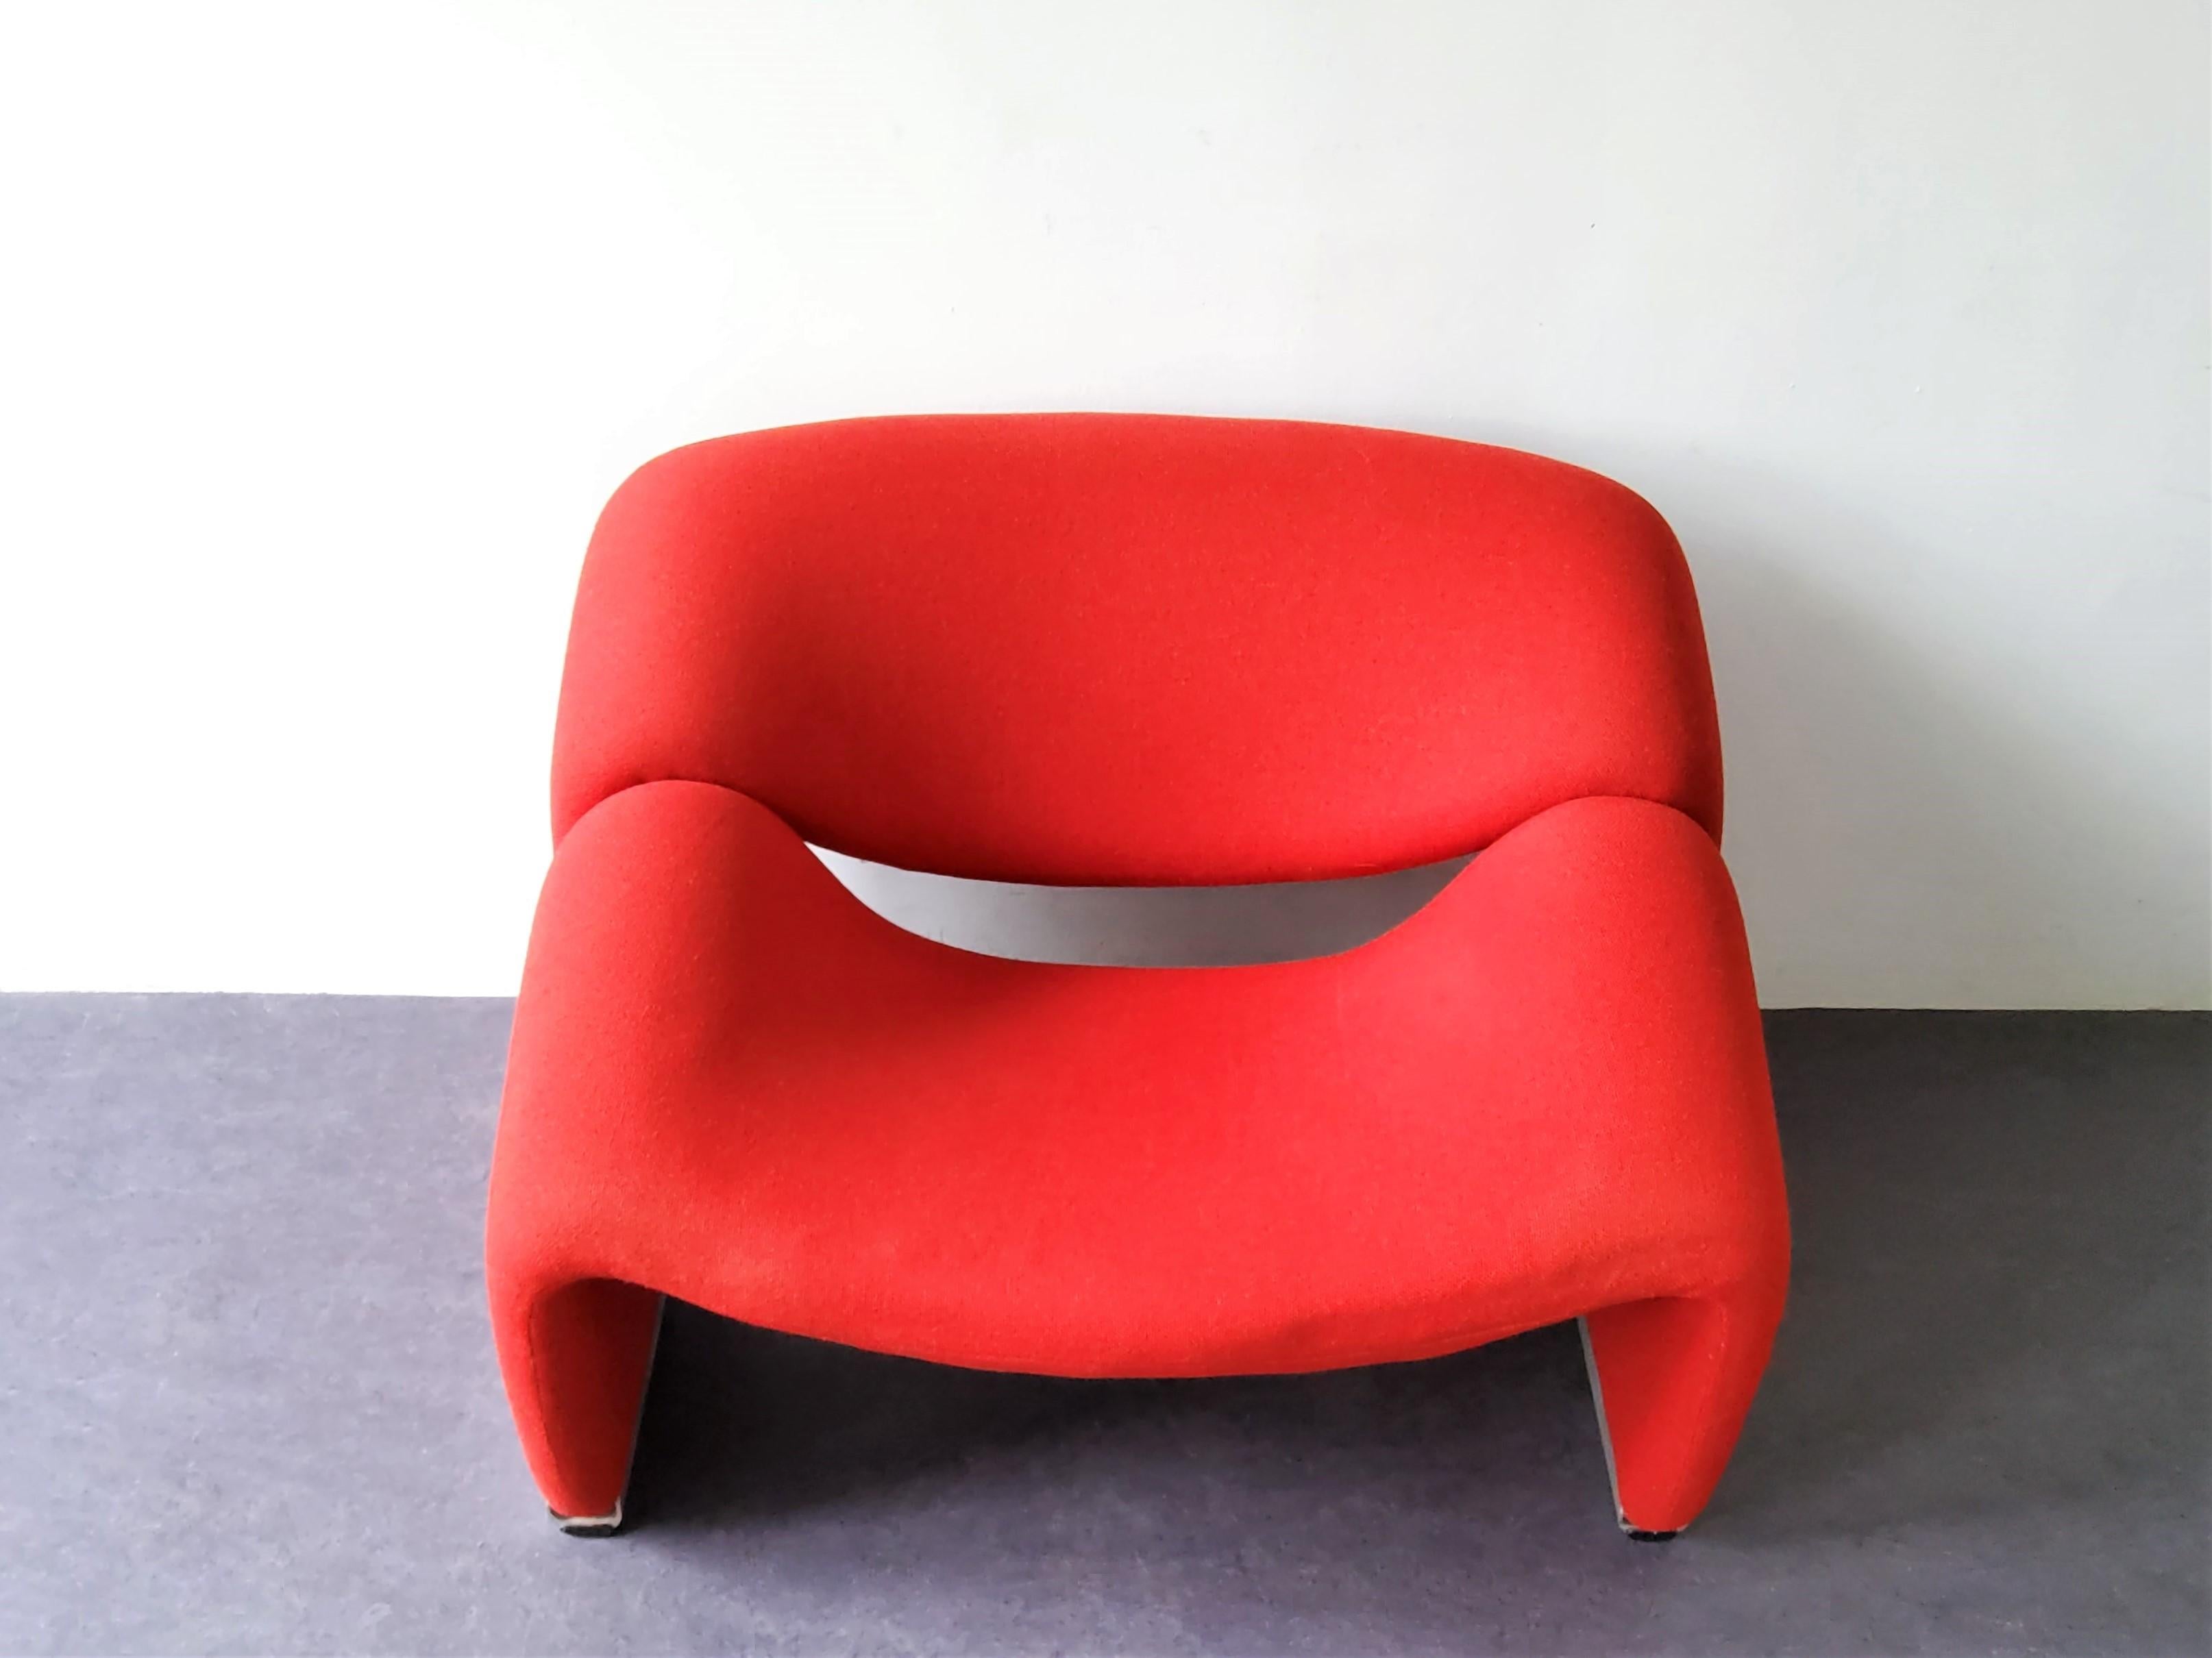 Dutch Vintage 'Groovy' or F598 Lounge Chair in Red by Pierre Paulin for Artifort